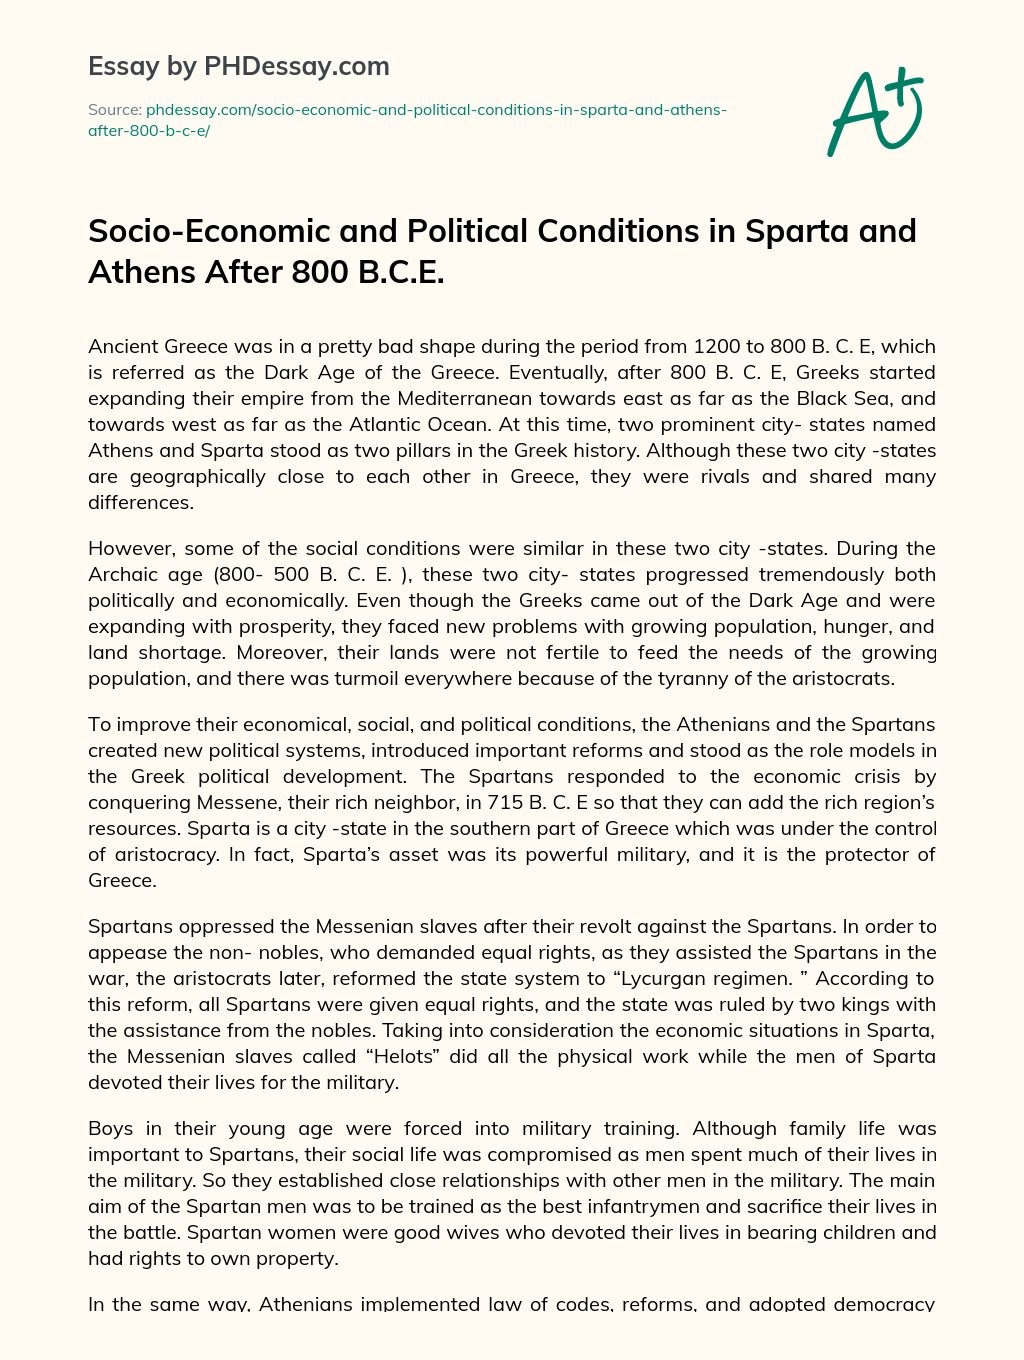 Socio-Economic and Political Conditions in Sparta and Athens After 800 B.C.E. essay